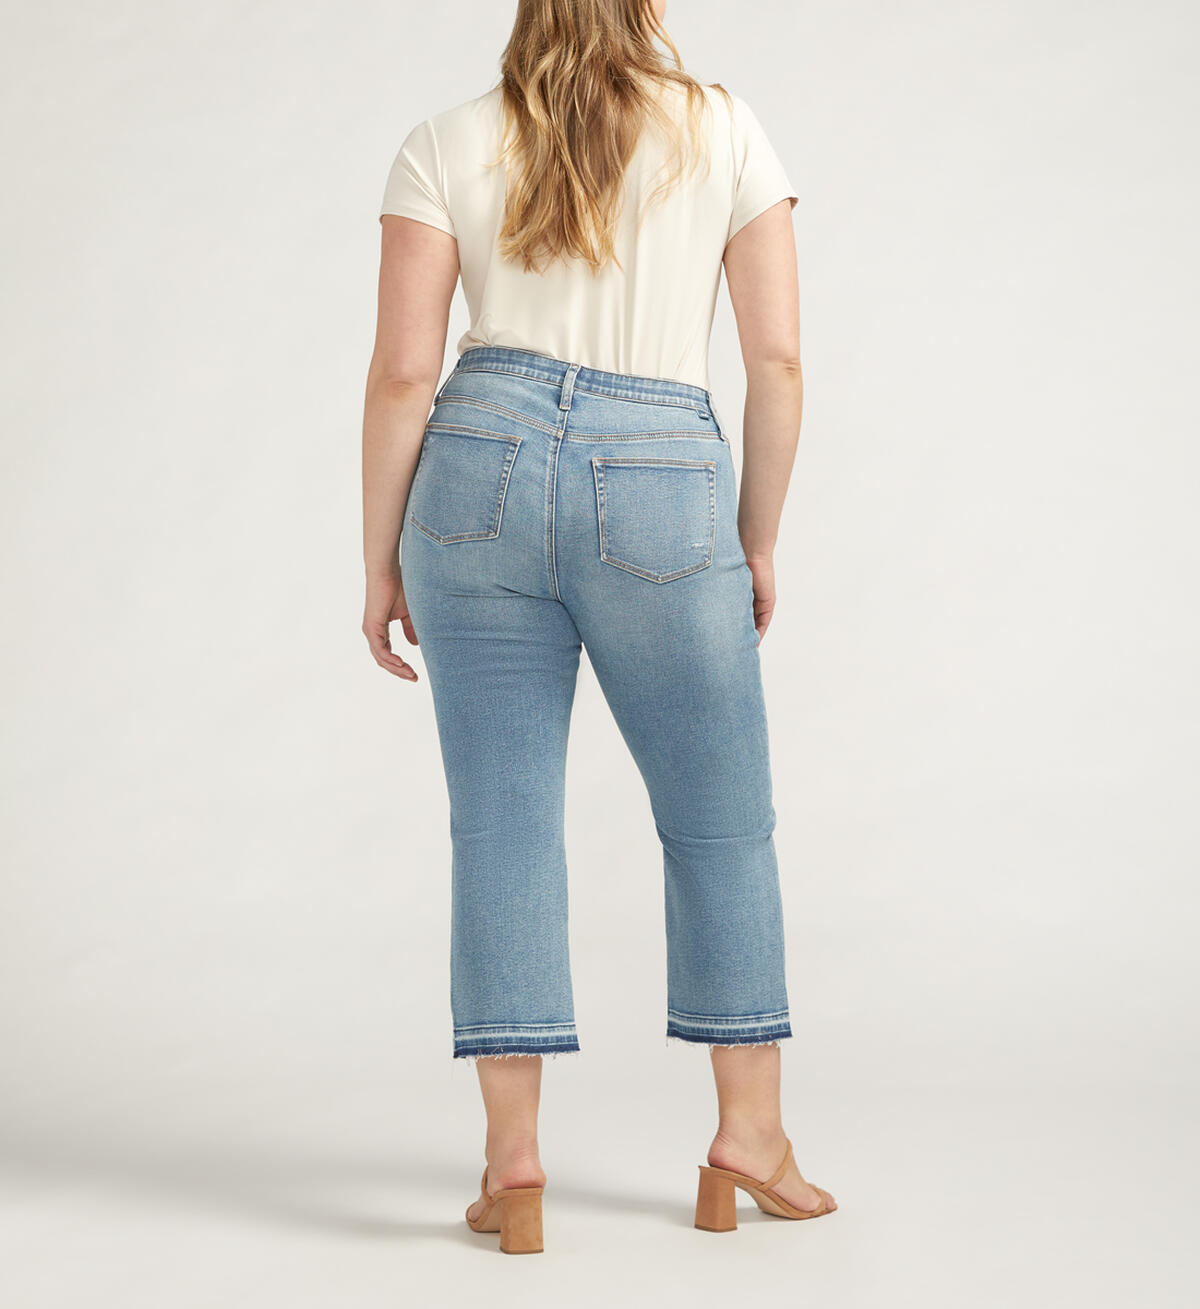 Eloise Mid Rise Cropped Bootcut Jeans Plus Size, , hi-res image number 1